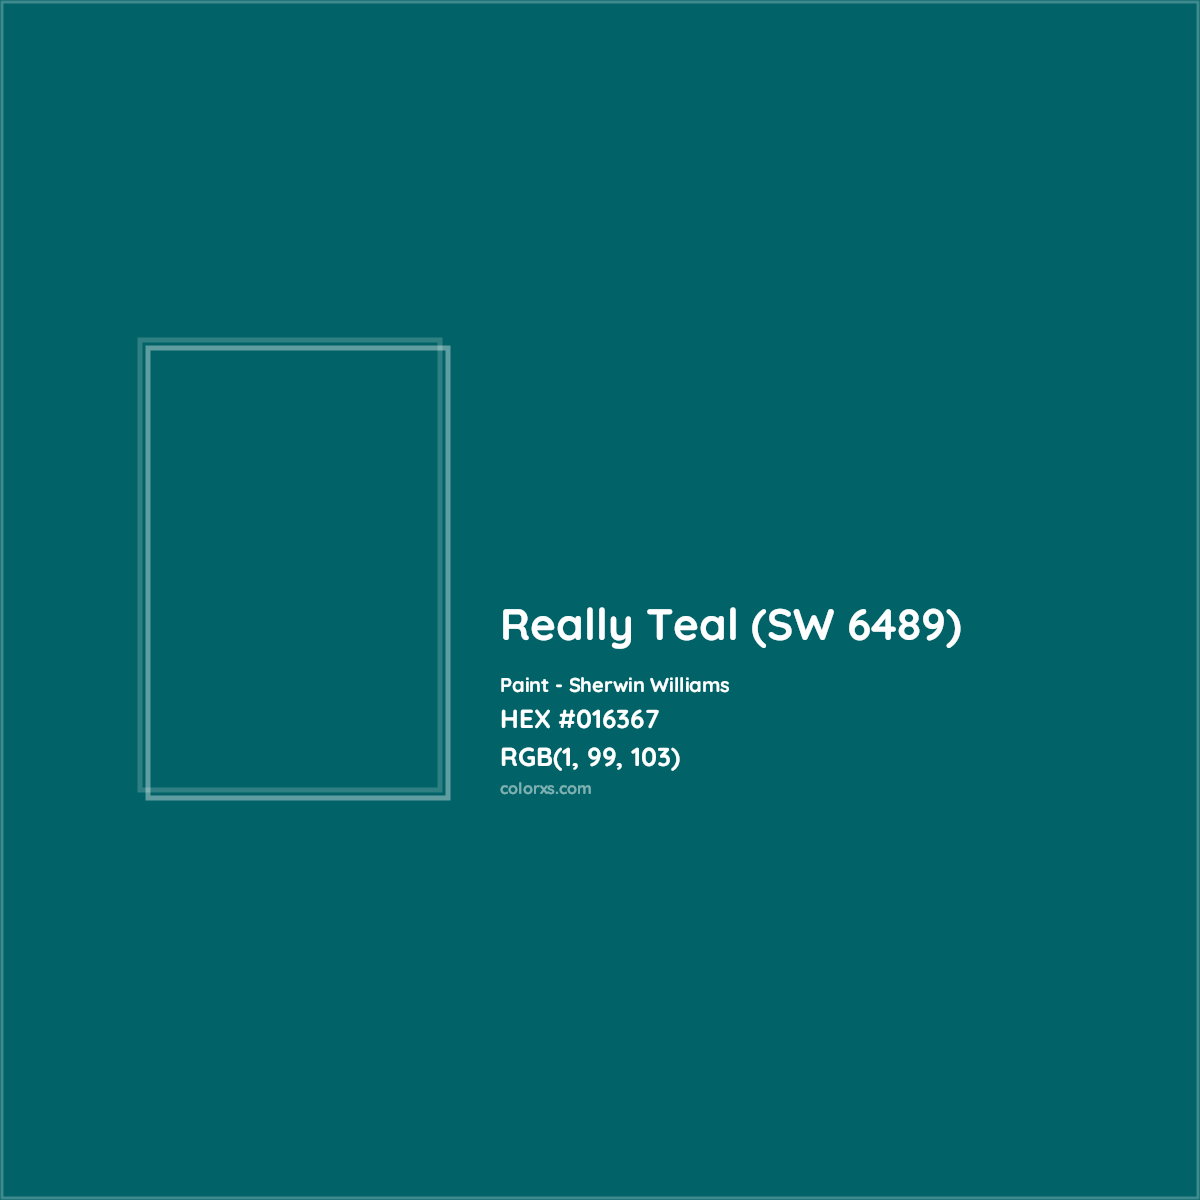 HEX #016367 Really Teal (SW 6489) Paint Sherwin Williams - Color Code